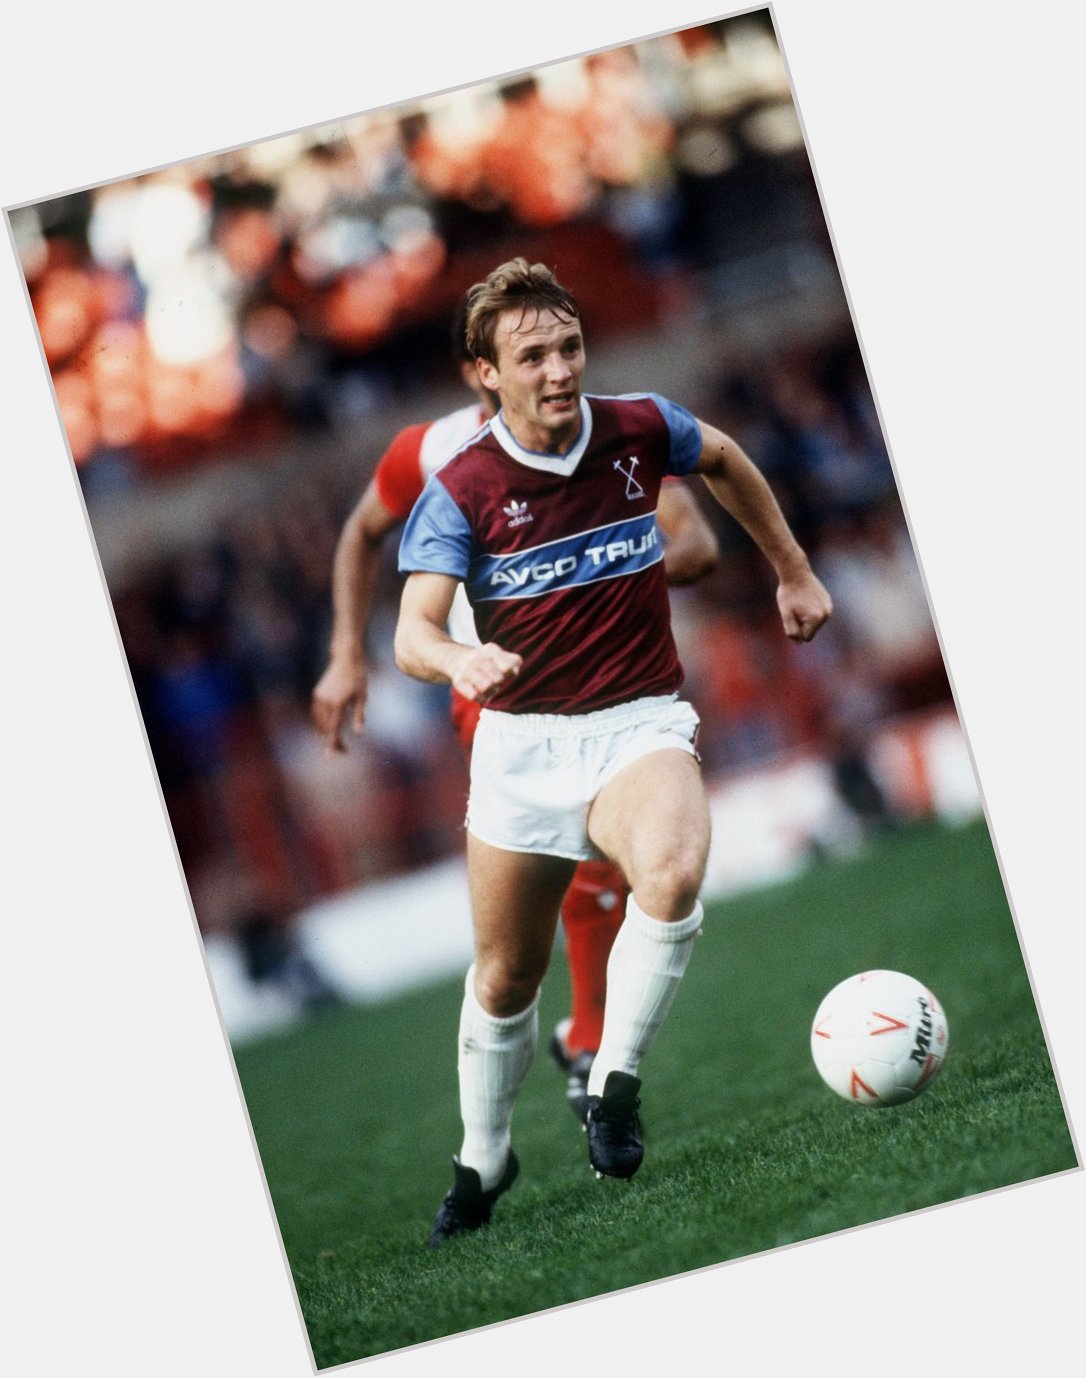 Wishing a very happy birthday to our former Hammer and England striker, Paul Goddard!  